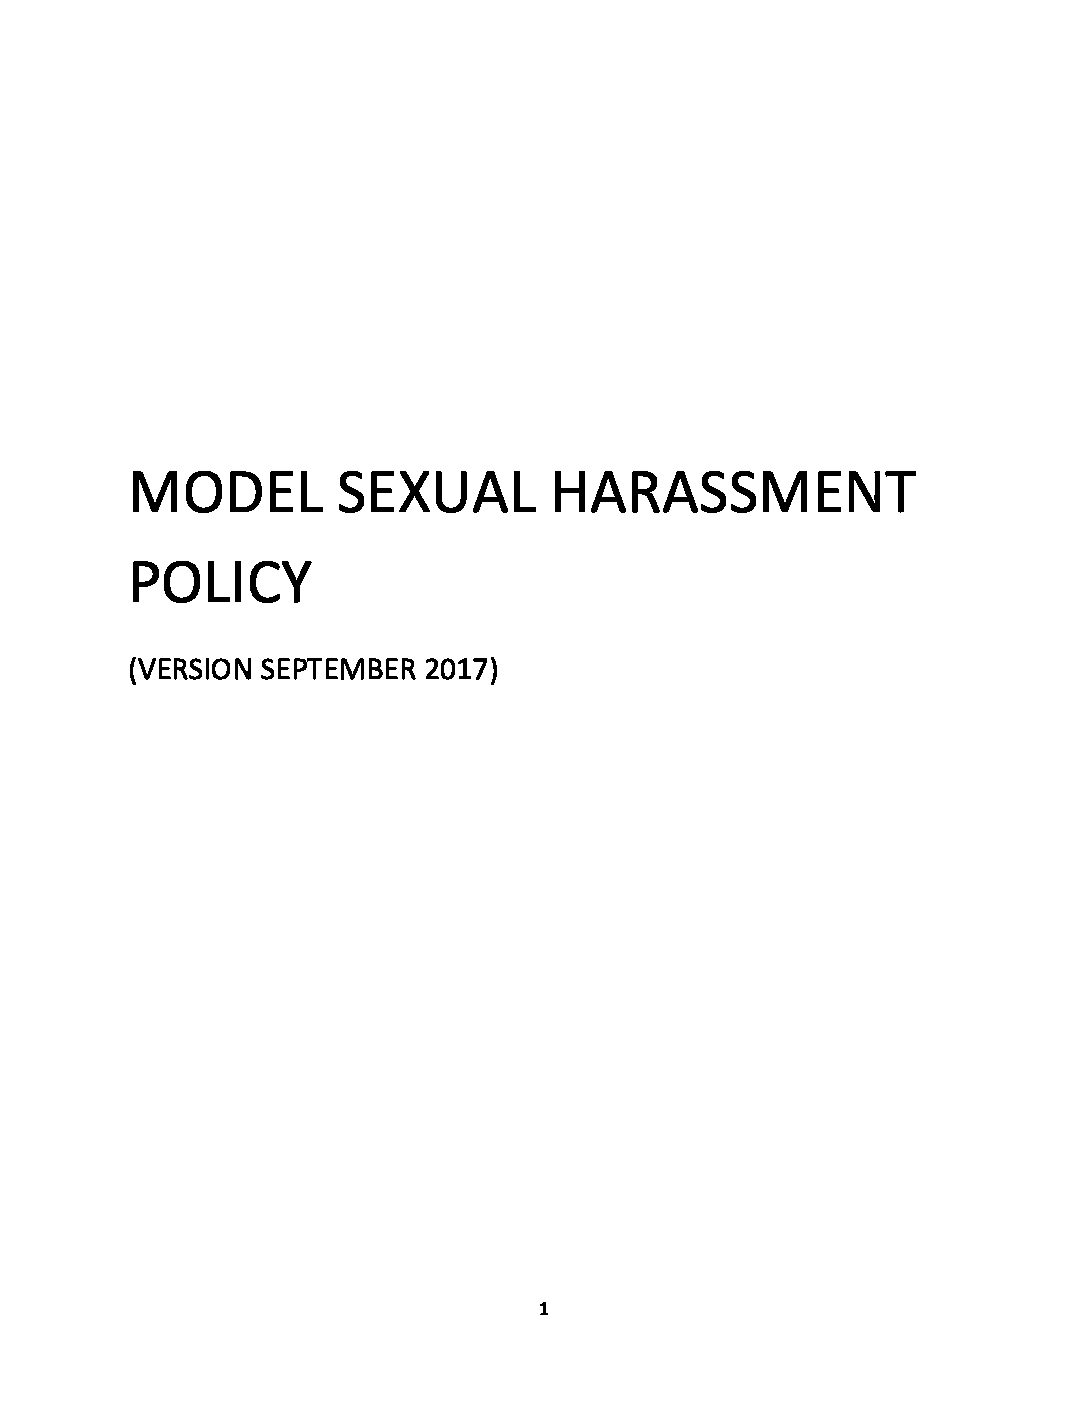 Model sexual harassment policy